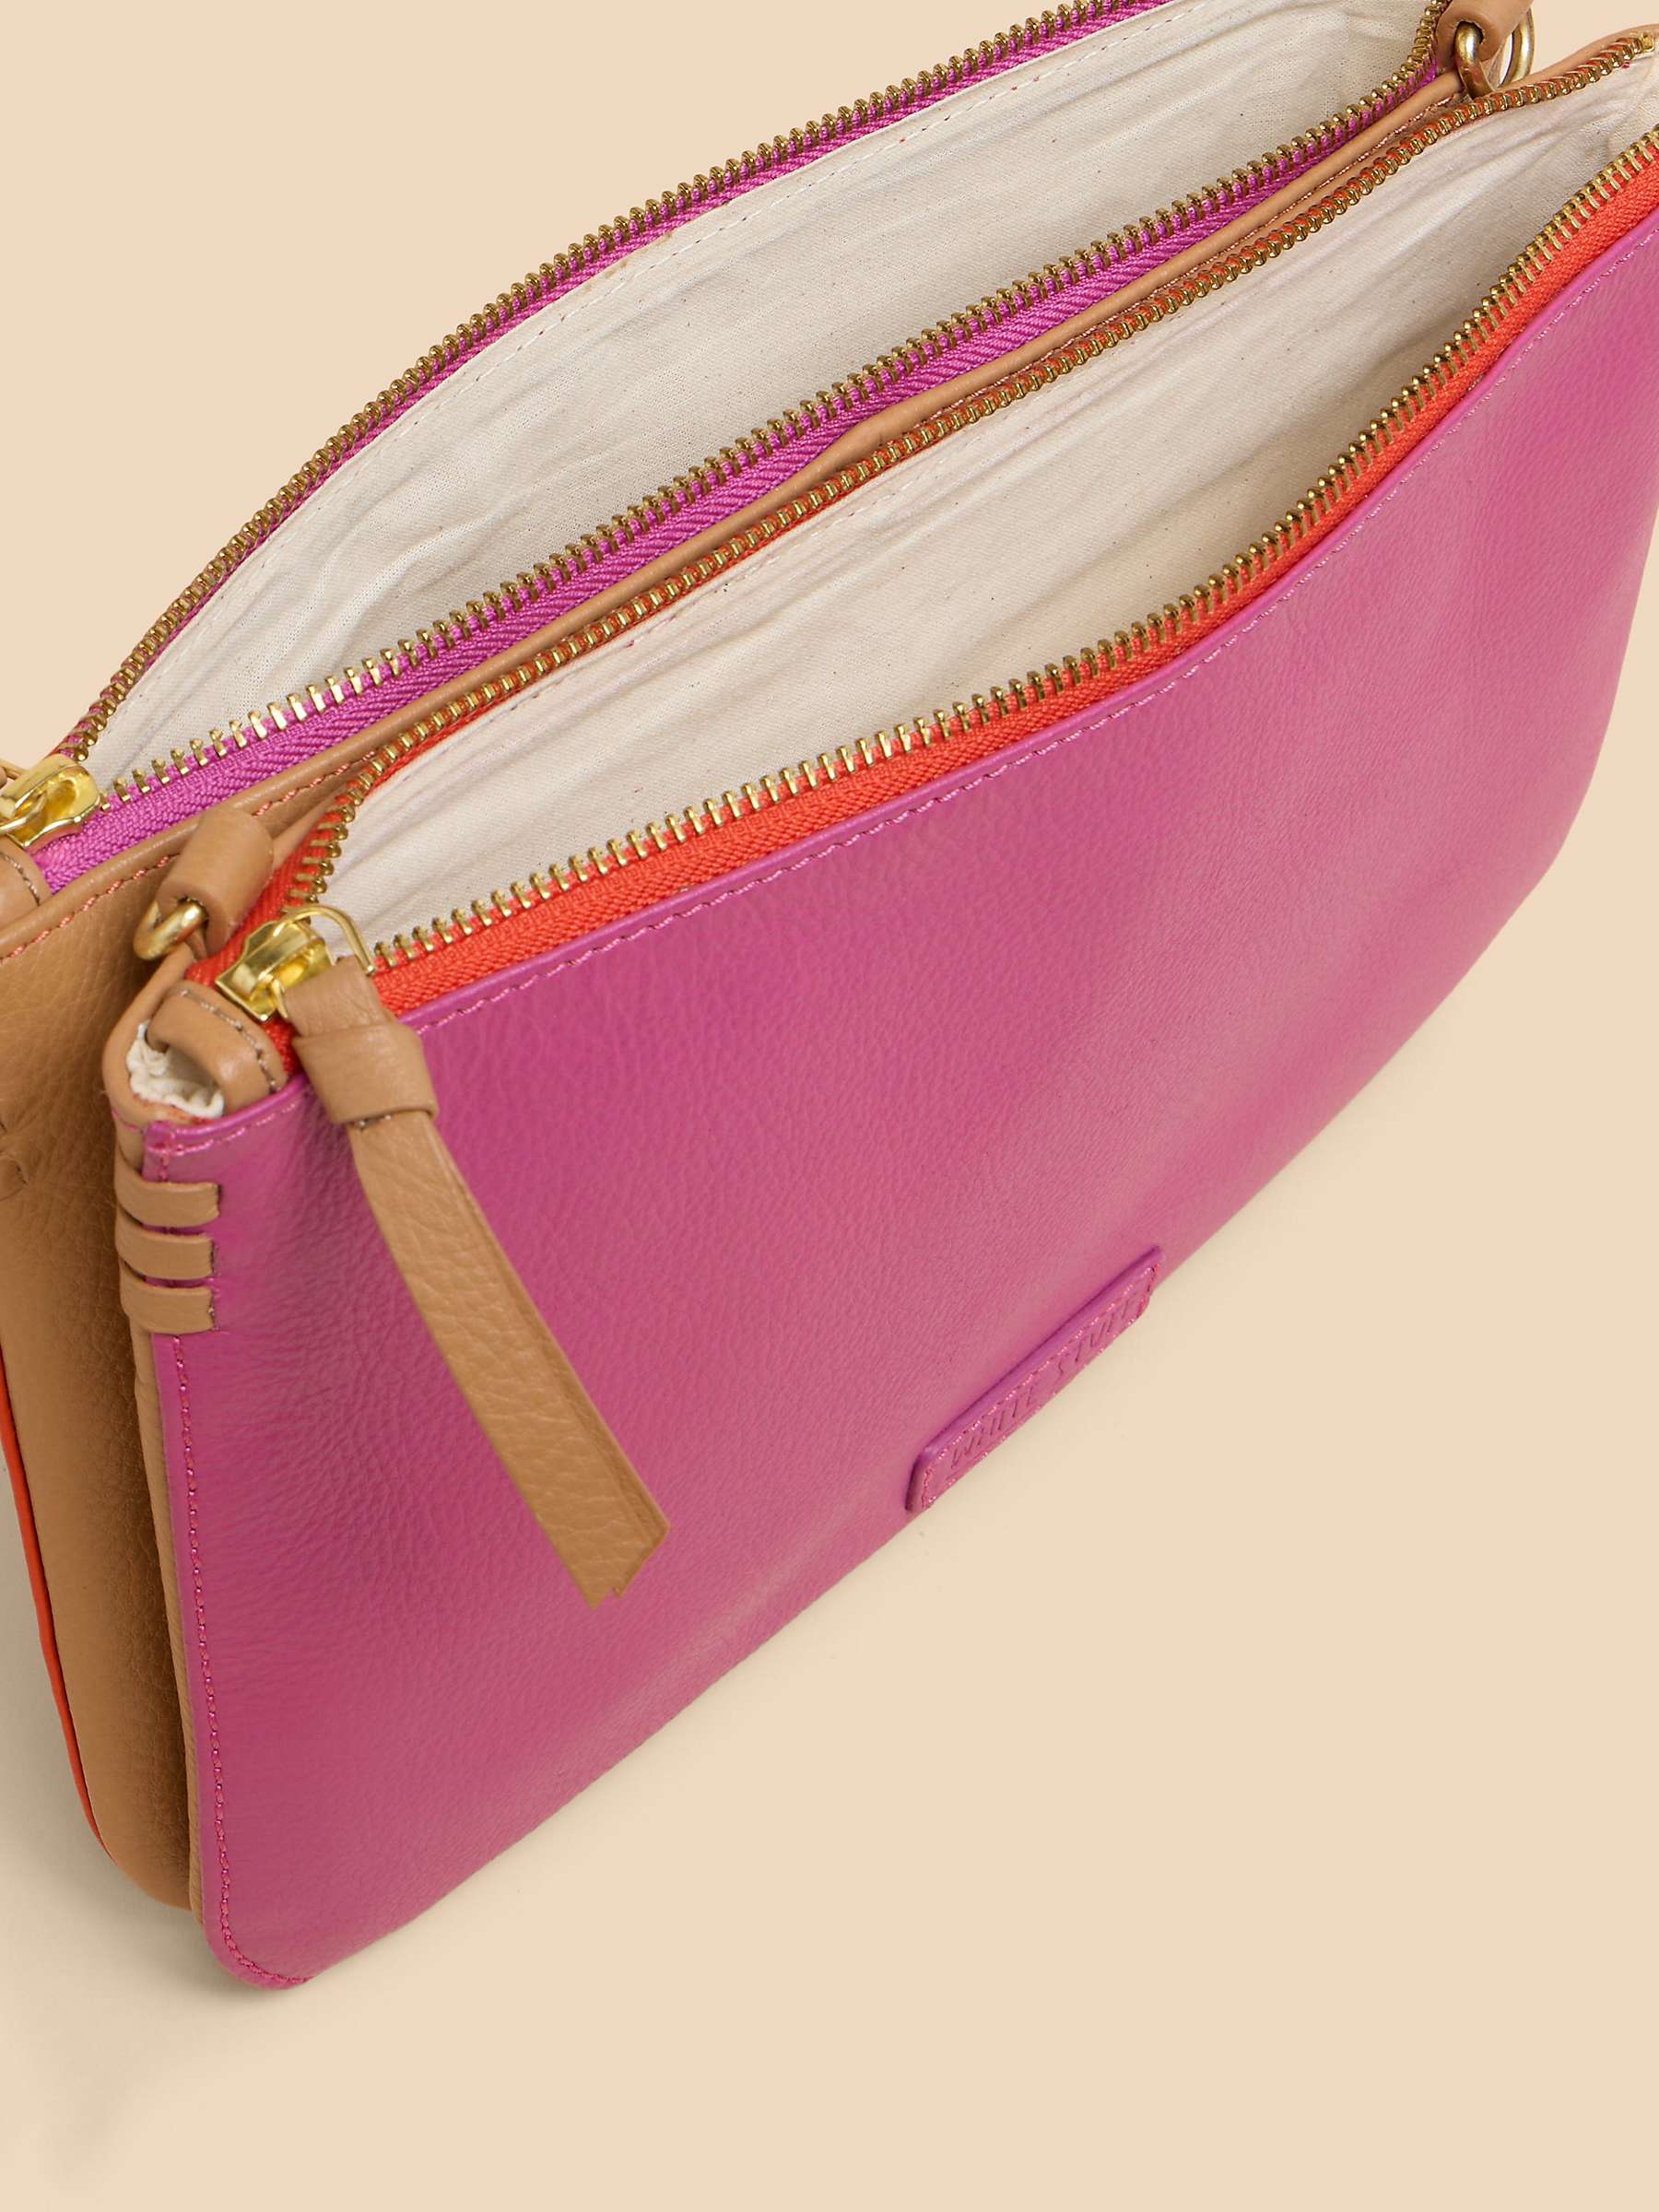 Buy White Stuff Convertible Leather Dual Pouch Bag, Orange/Multi Online at johnlewis.com